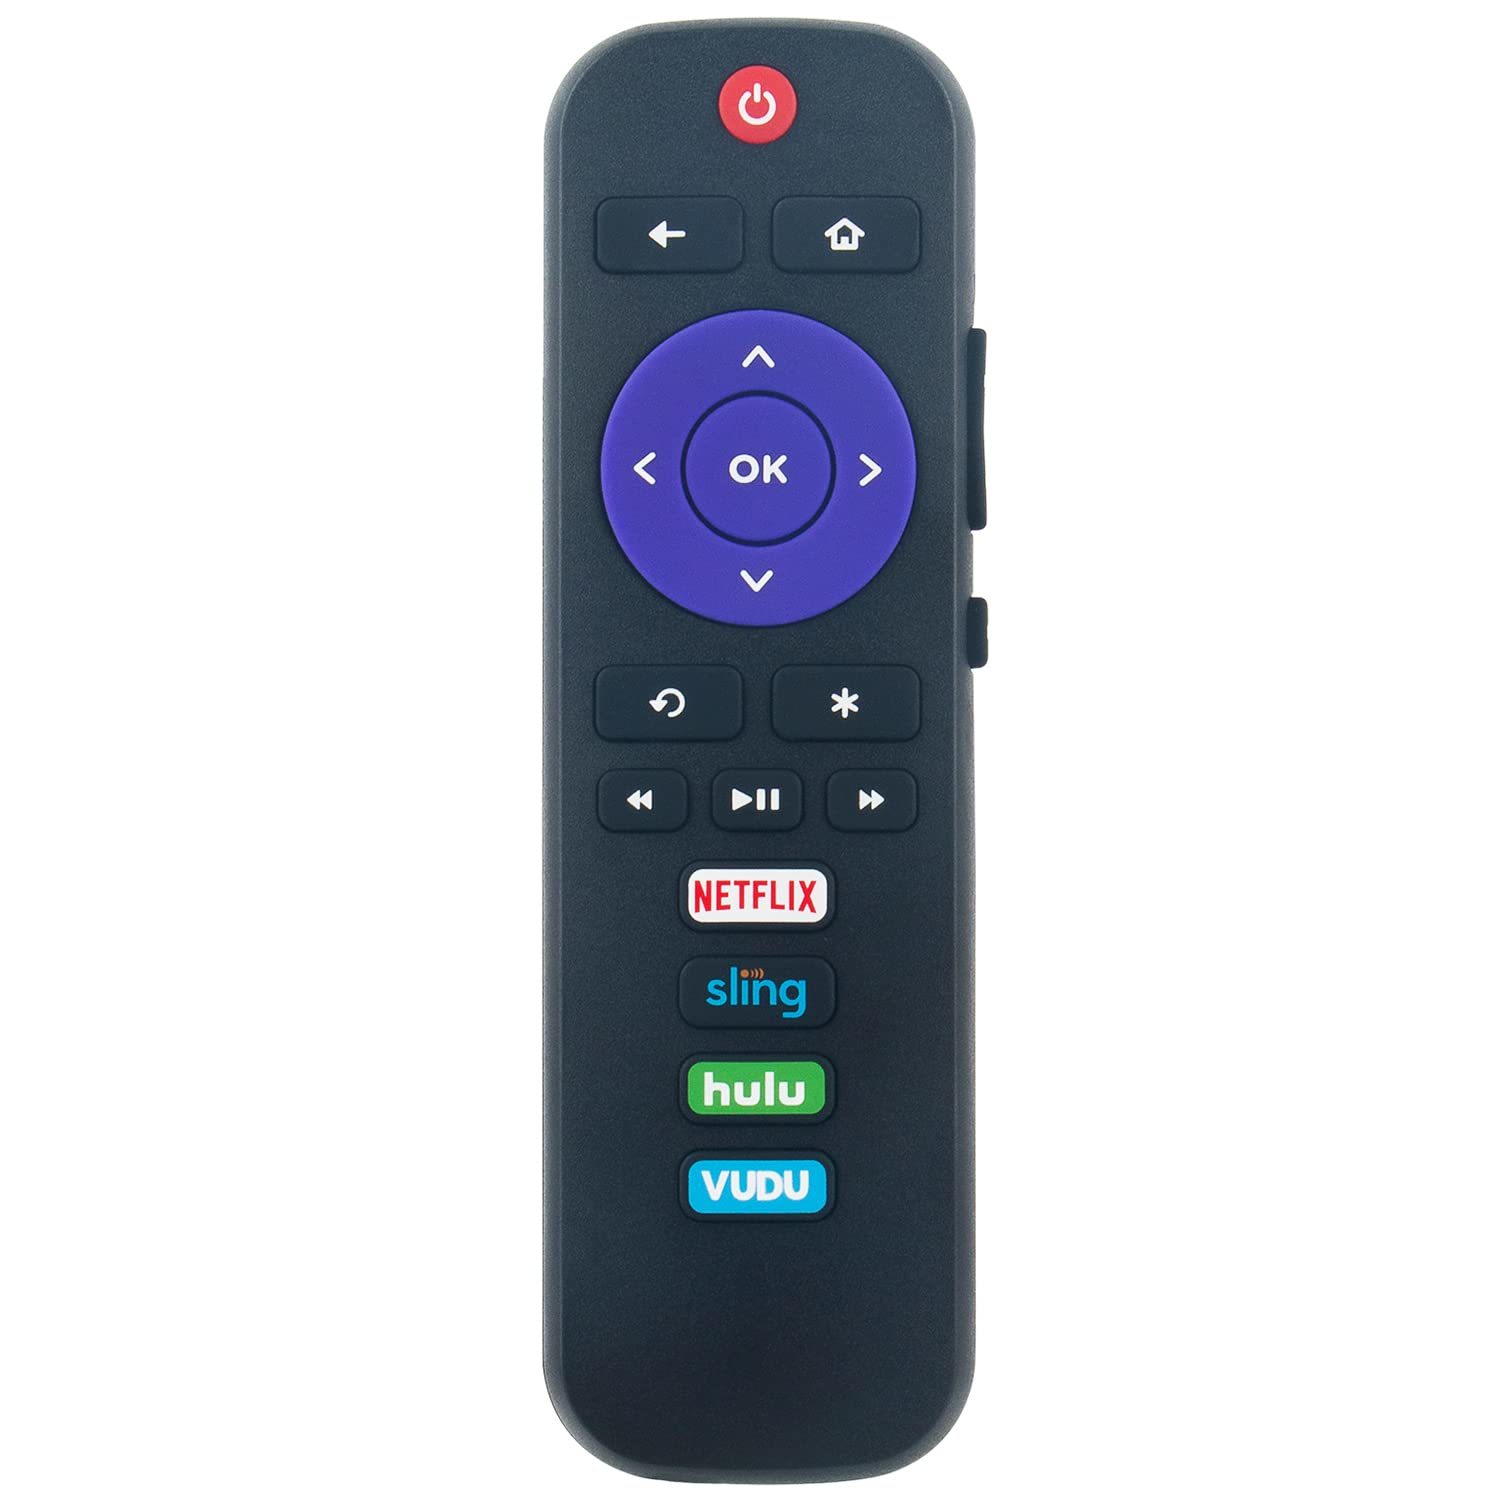 Rc280 Replacement Remote Applicable For Tcl Roku Tv 40Fs3800 43S305 40S325 55S40